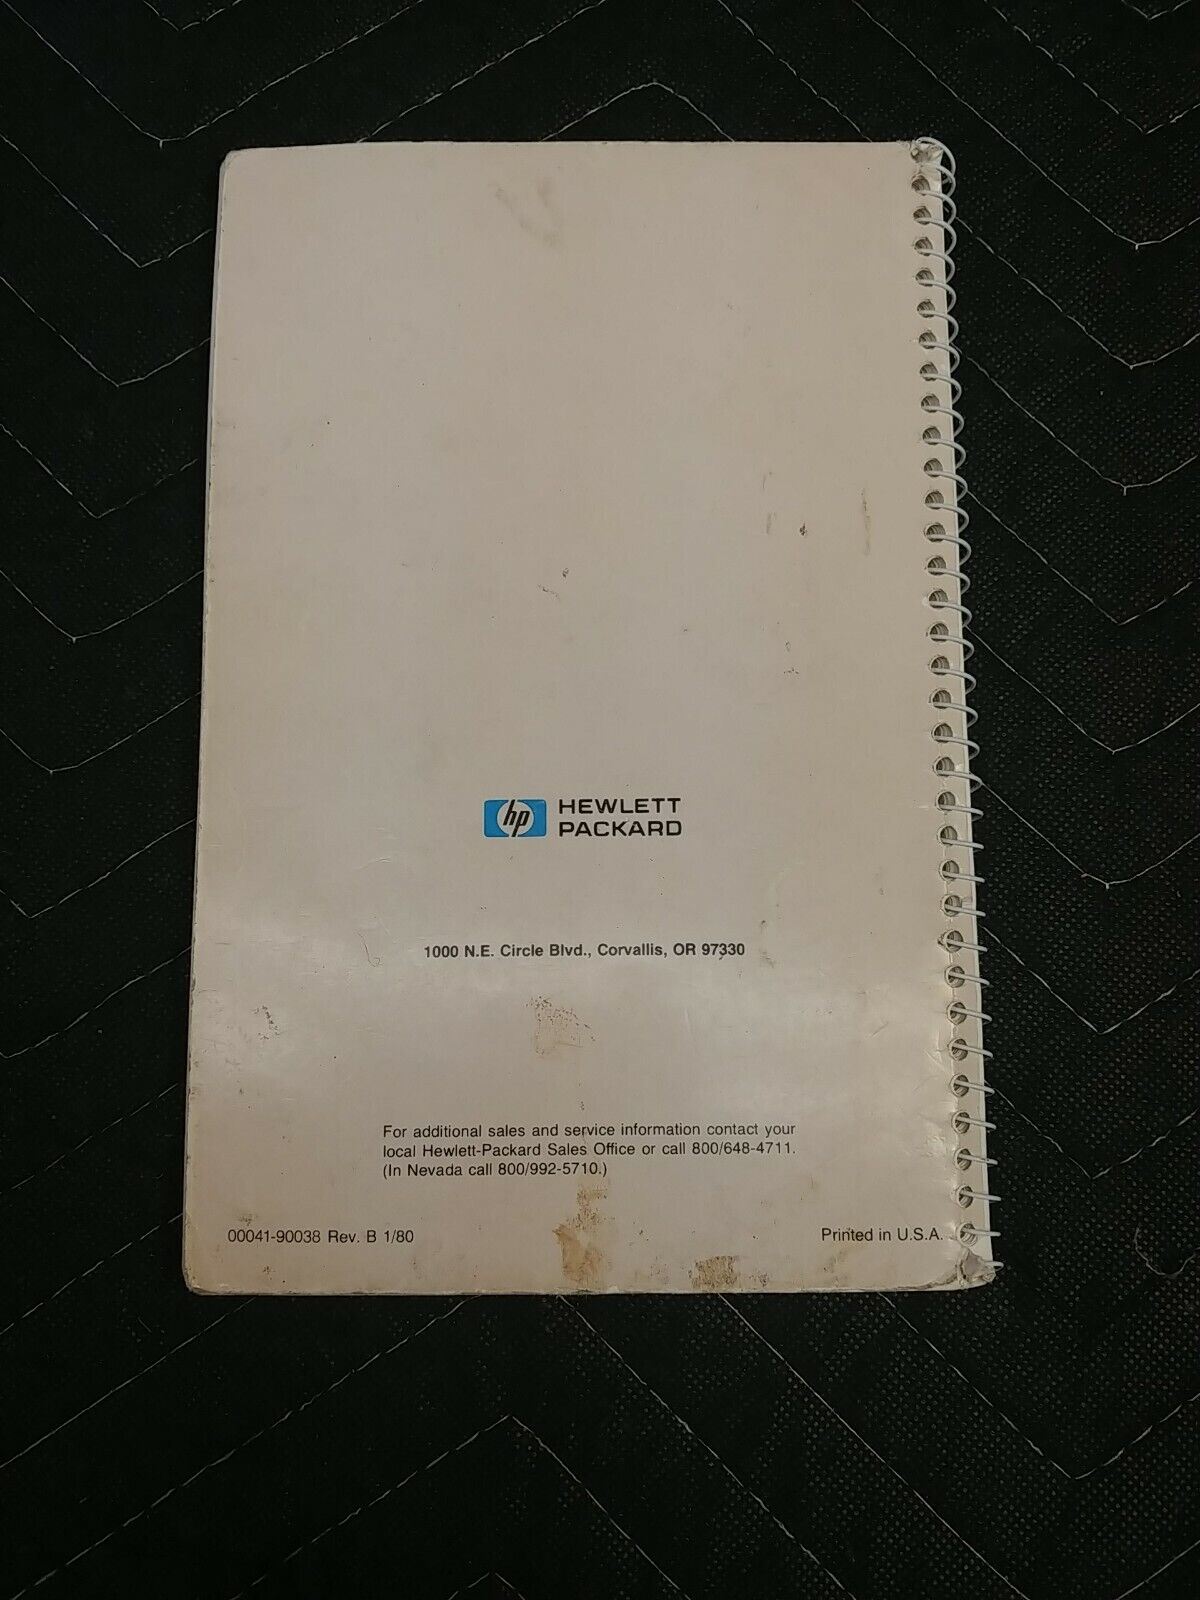 Hewlett-Packard HP-41C Application Pac / Surveying Pac Box, Manual & Papers Only